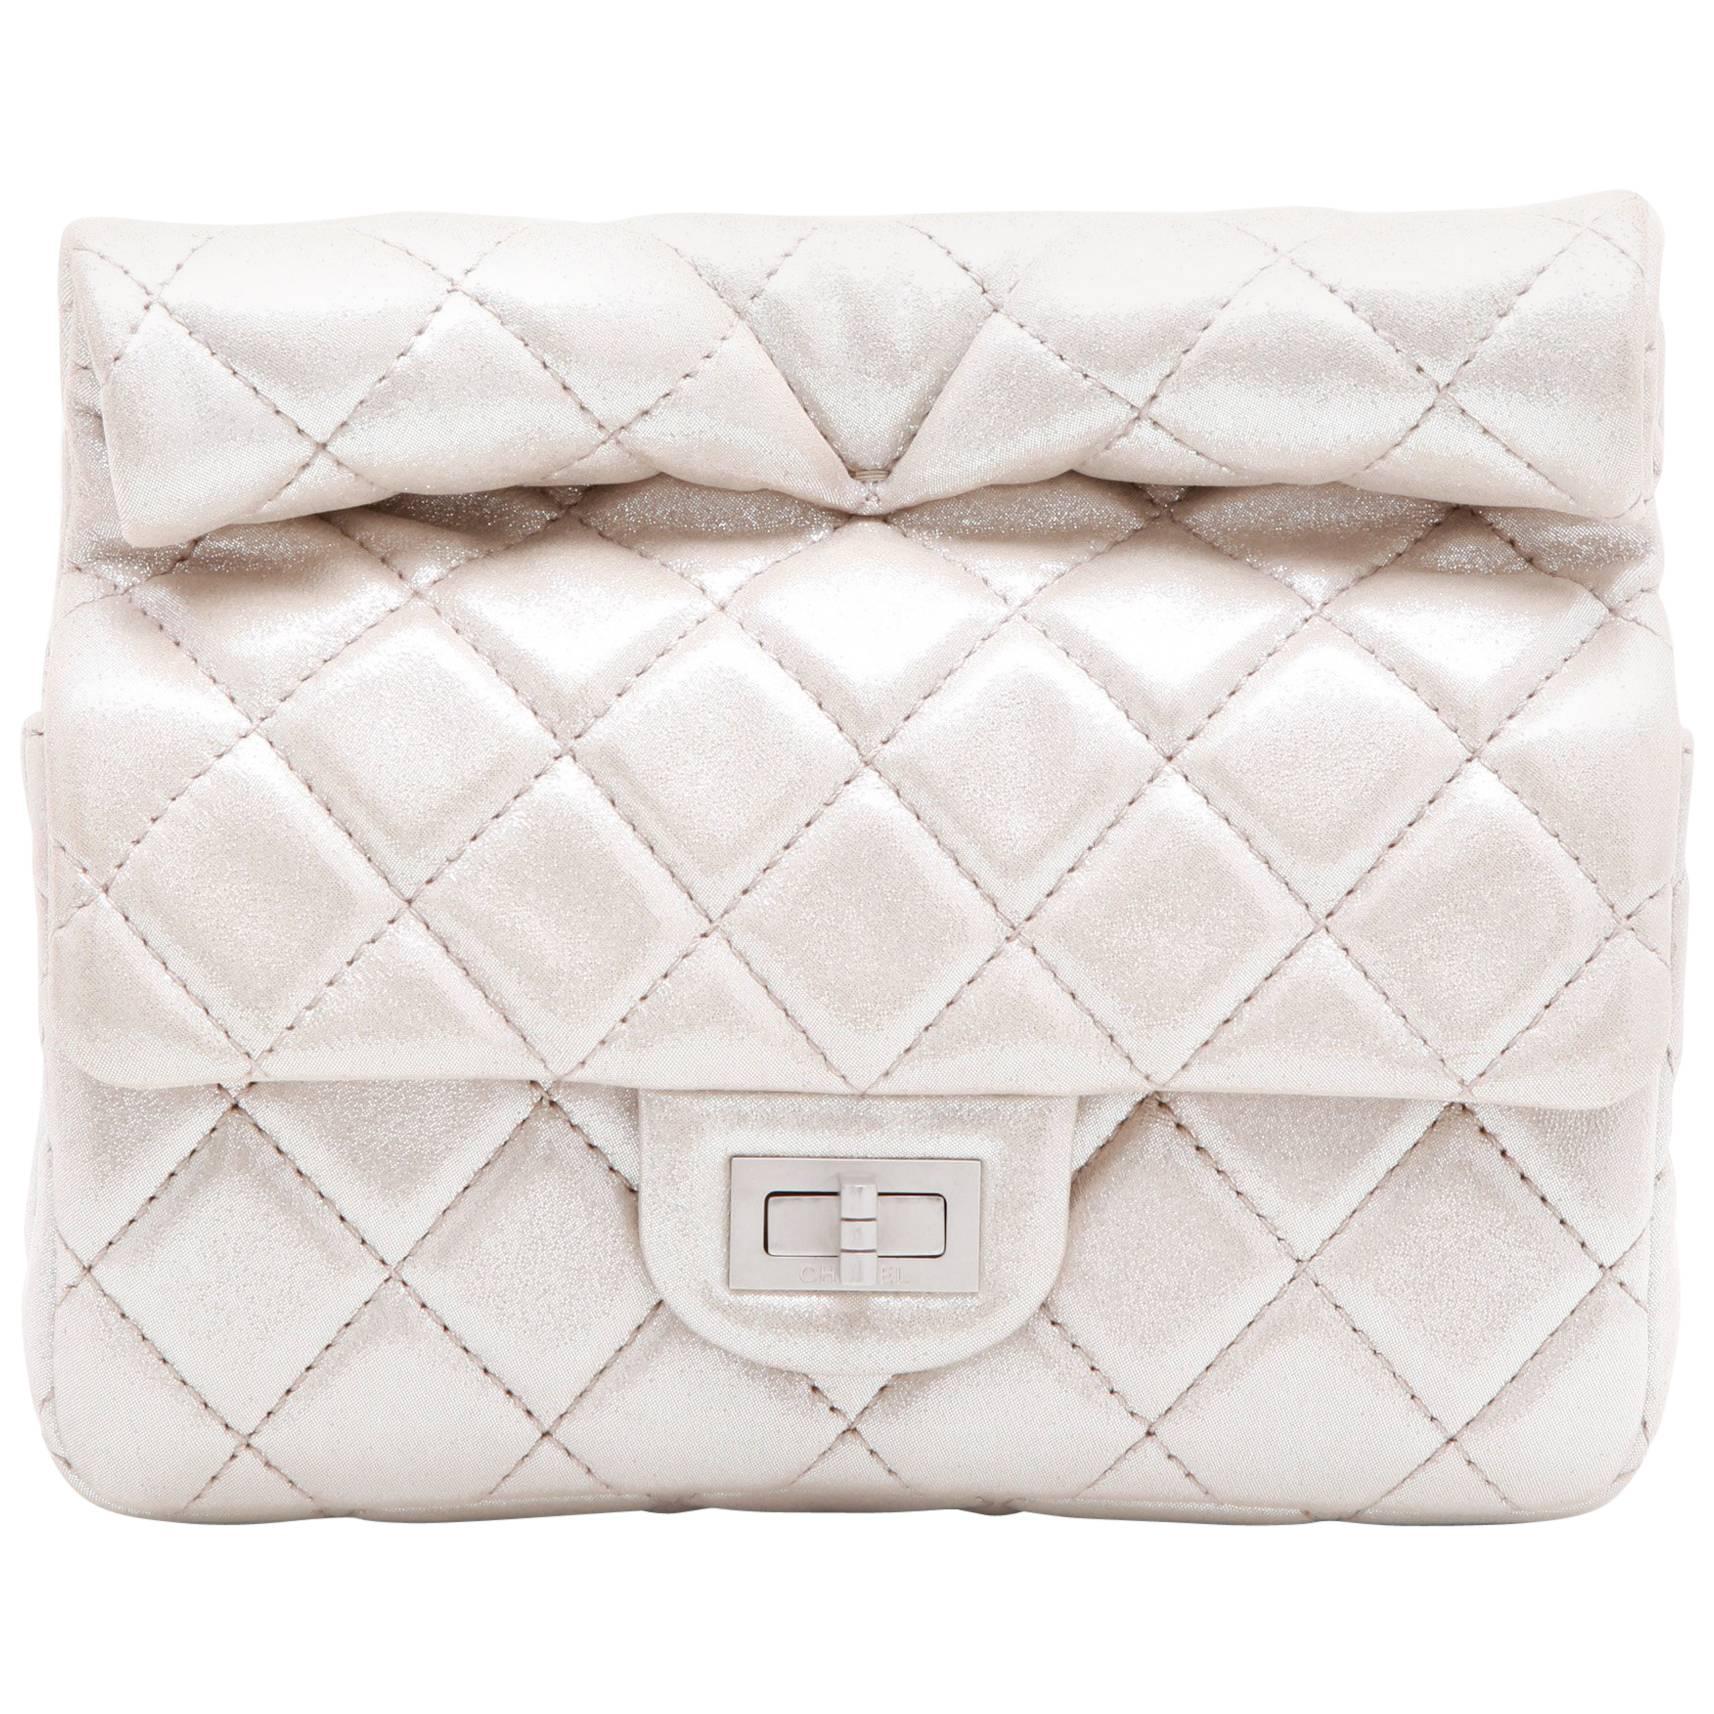 CHANEL Evening Bag in Light Iridescent Silver Lamé Leather